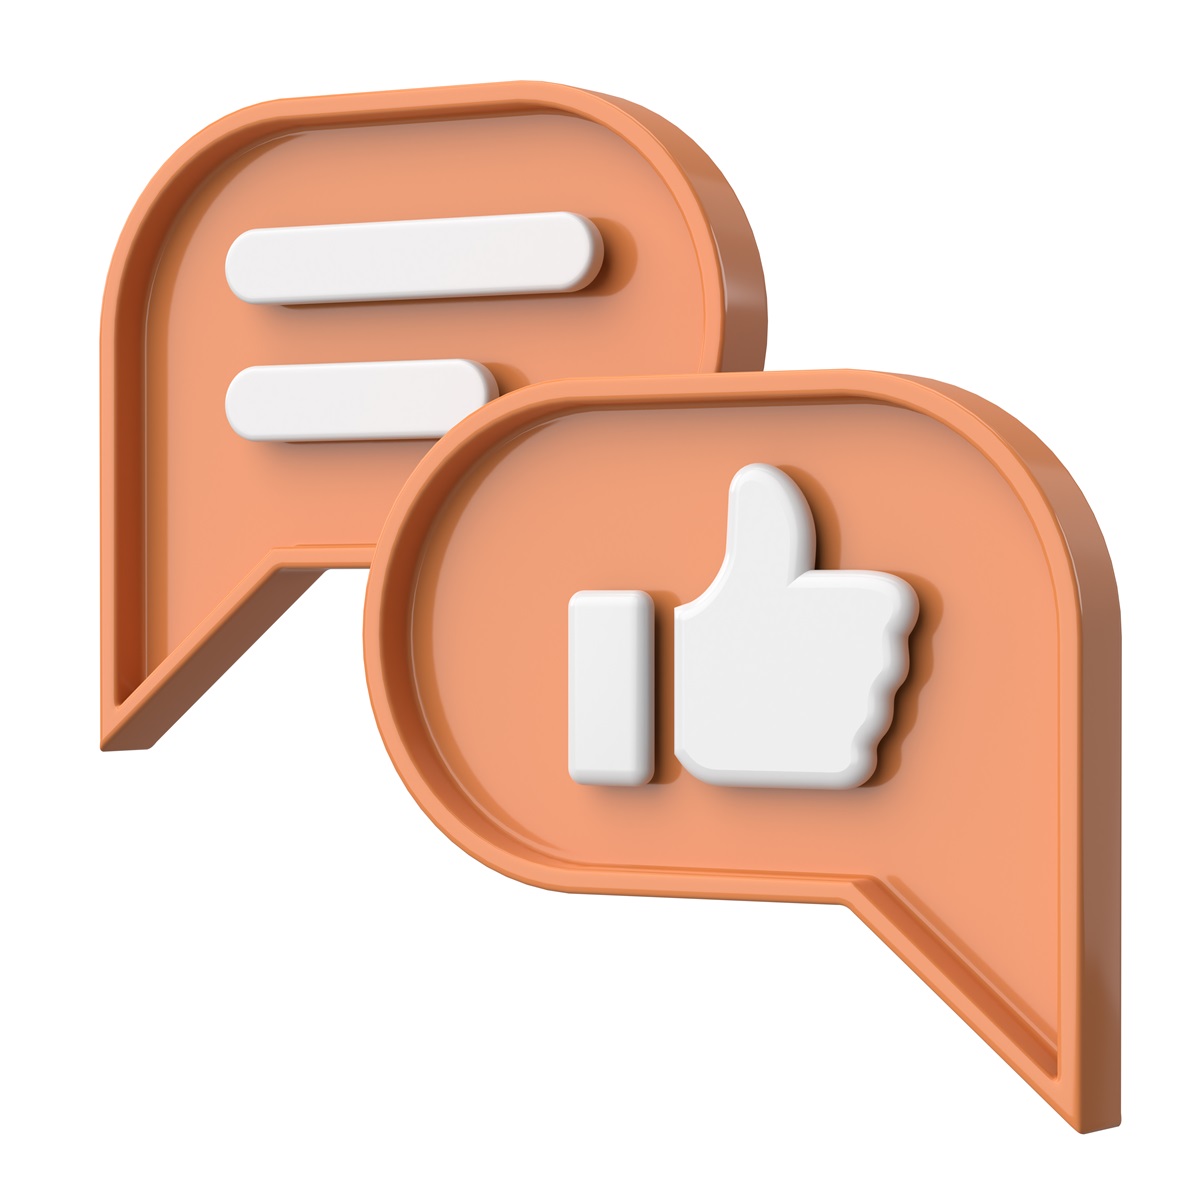 Like icon. Chat bubble. 3D illustration.